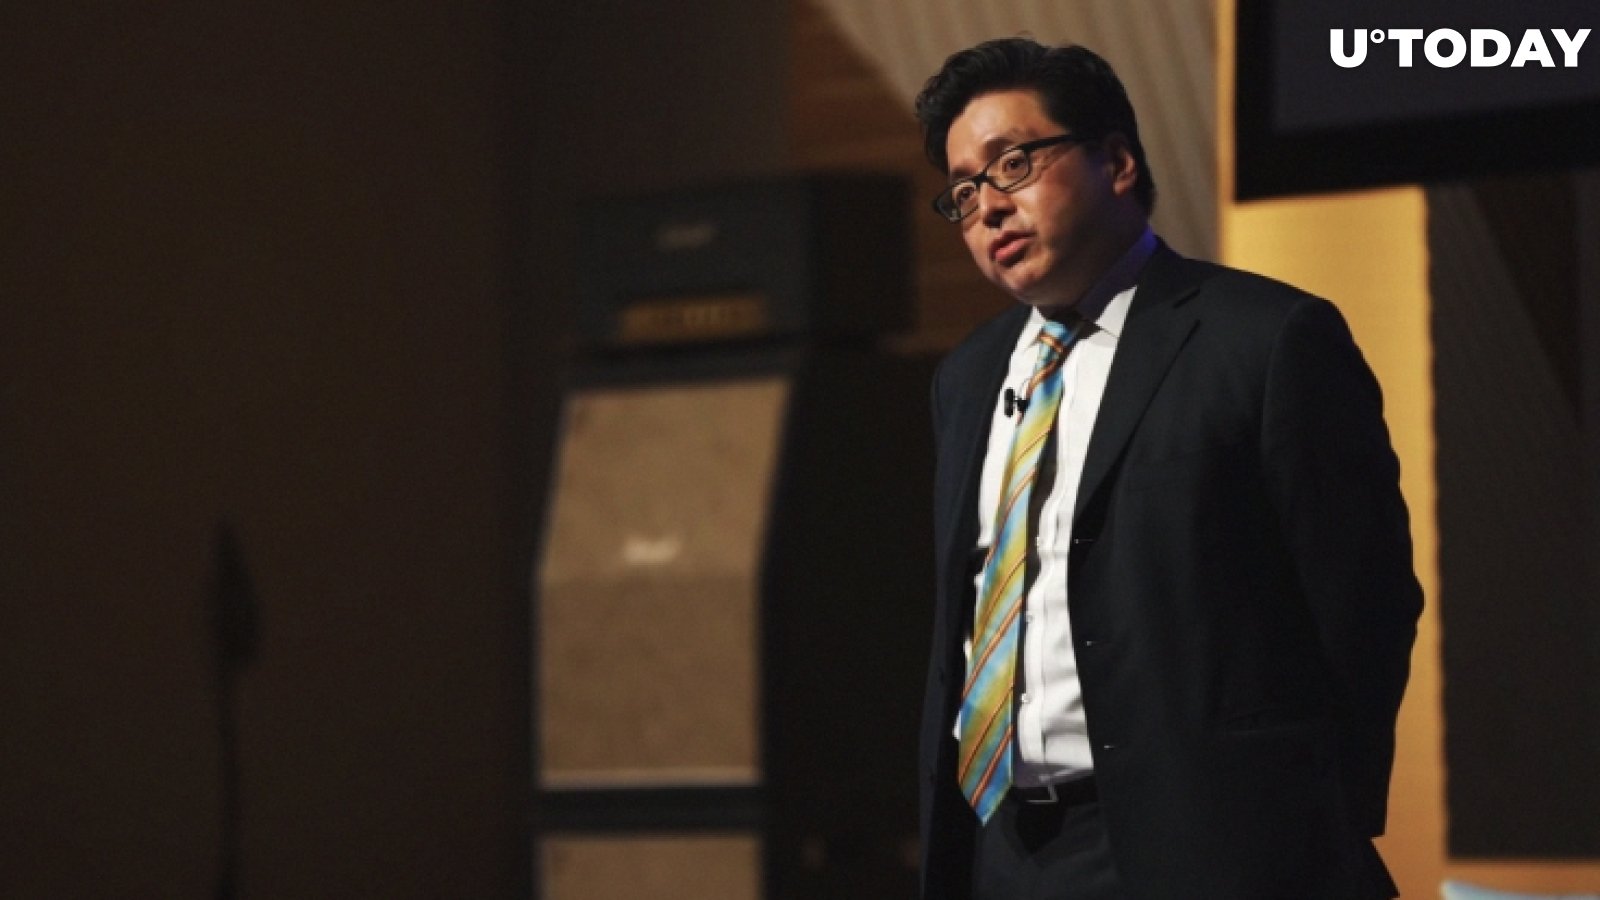 Bitcoin Bull Tom Lee Says Markets Are in "Good Position" to Rally